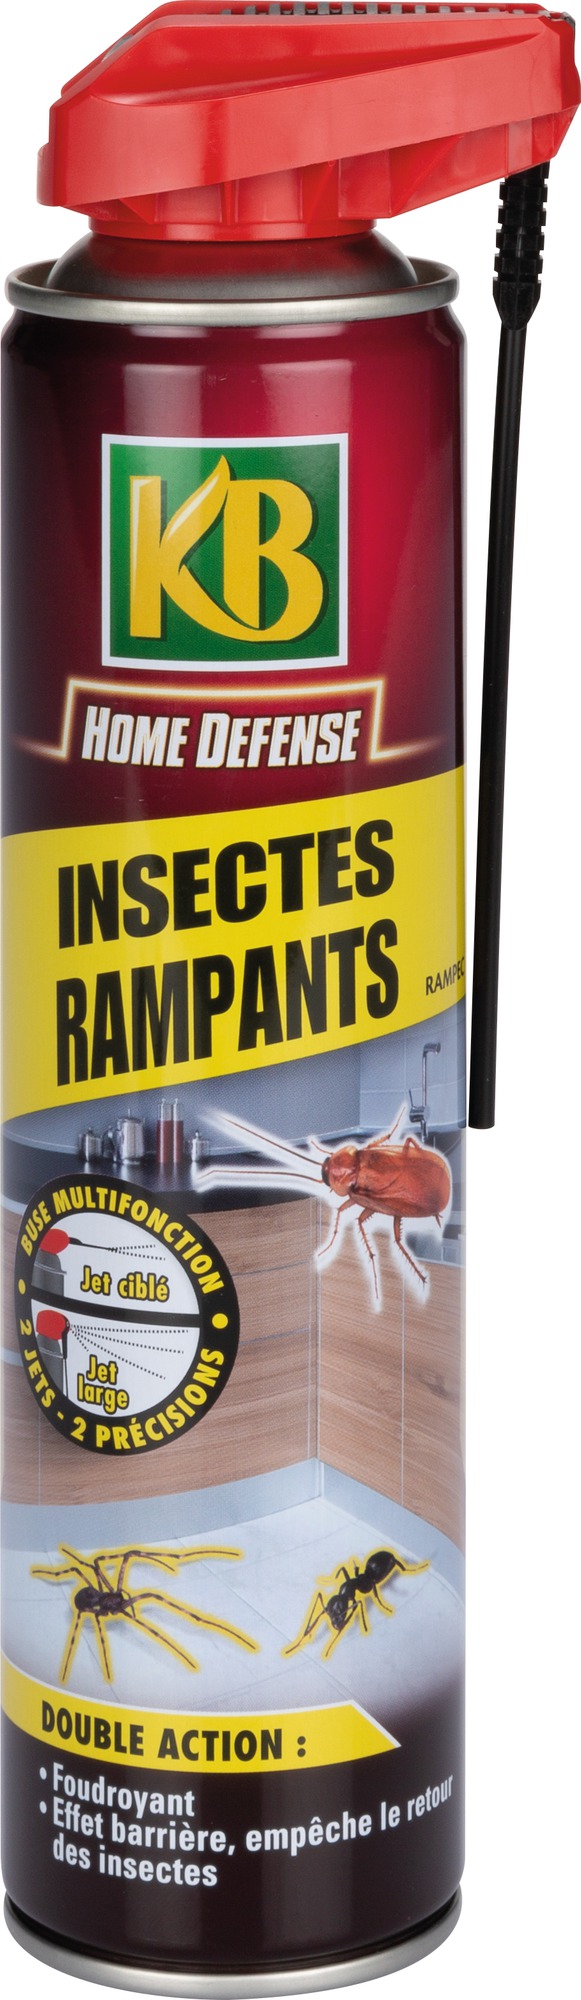 Insecticide insectes rampants KB jardin - Contenance 400 ml